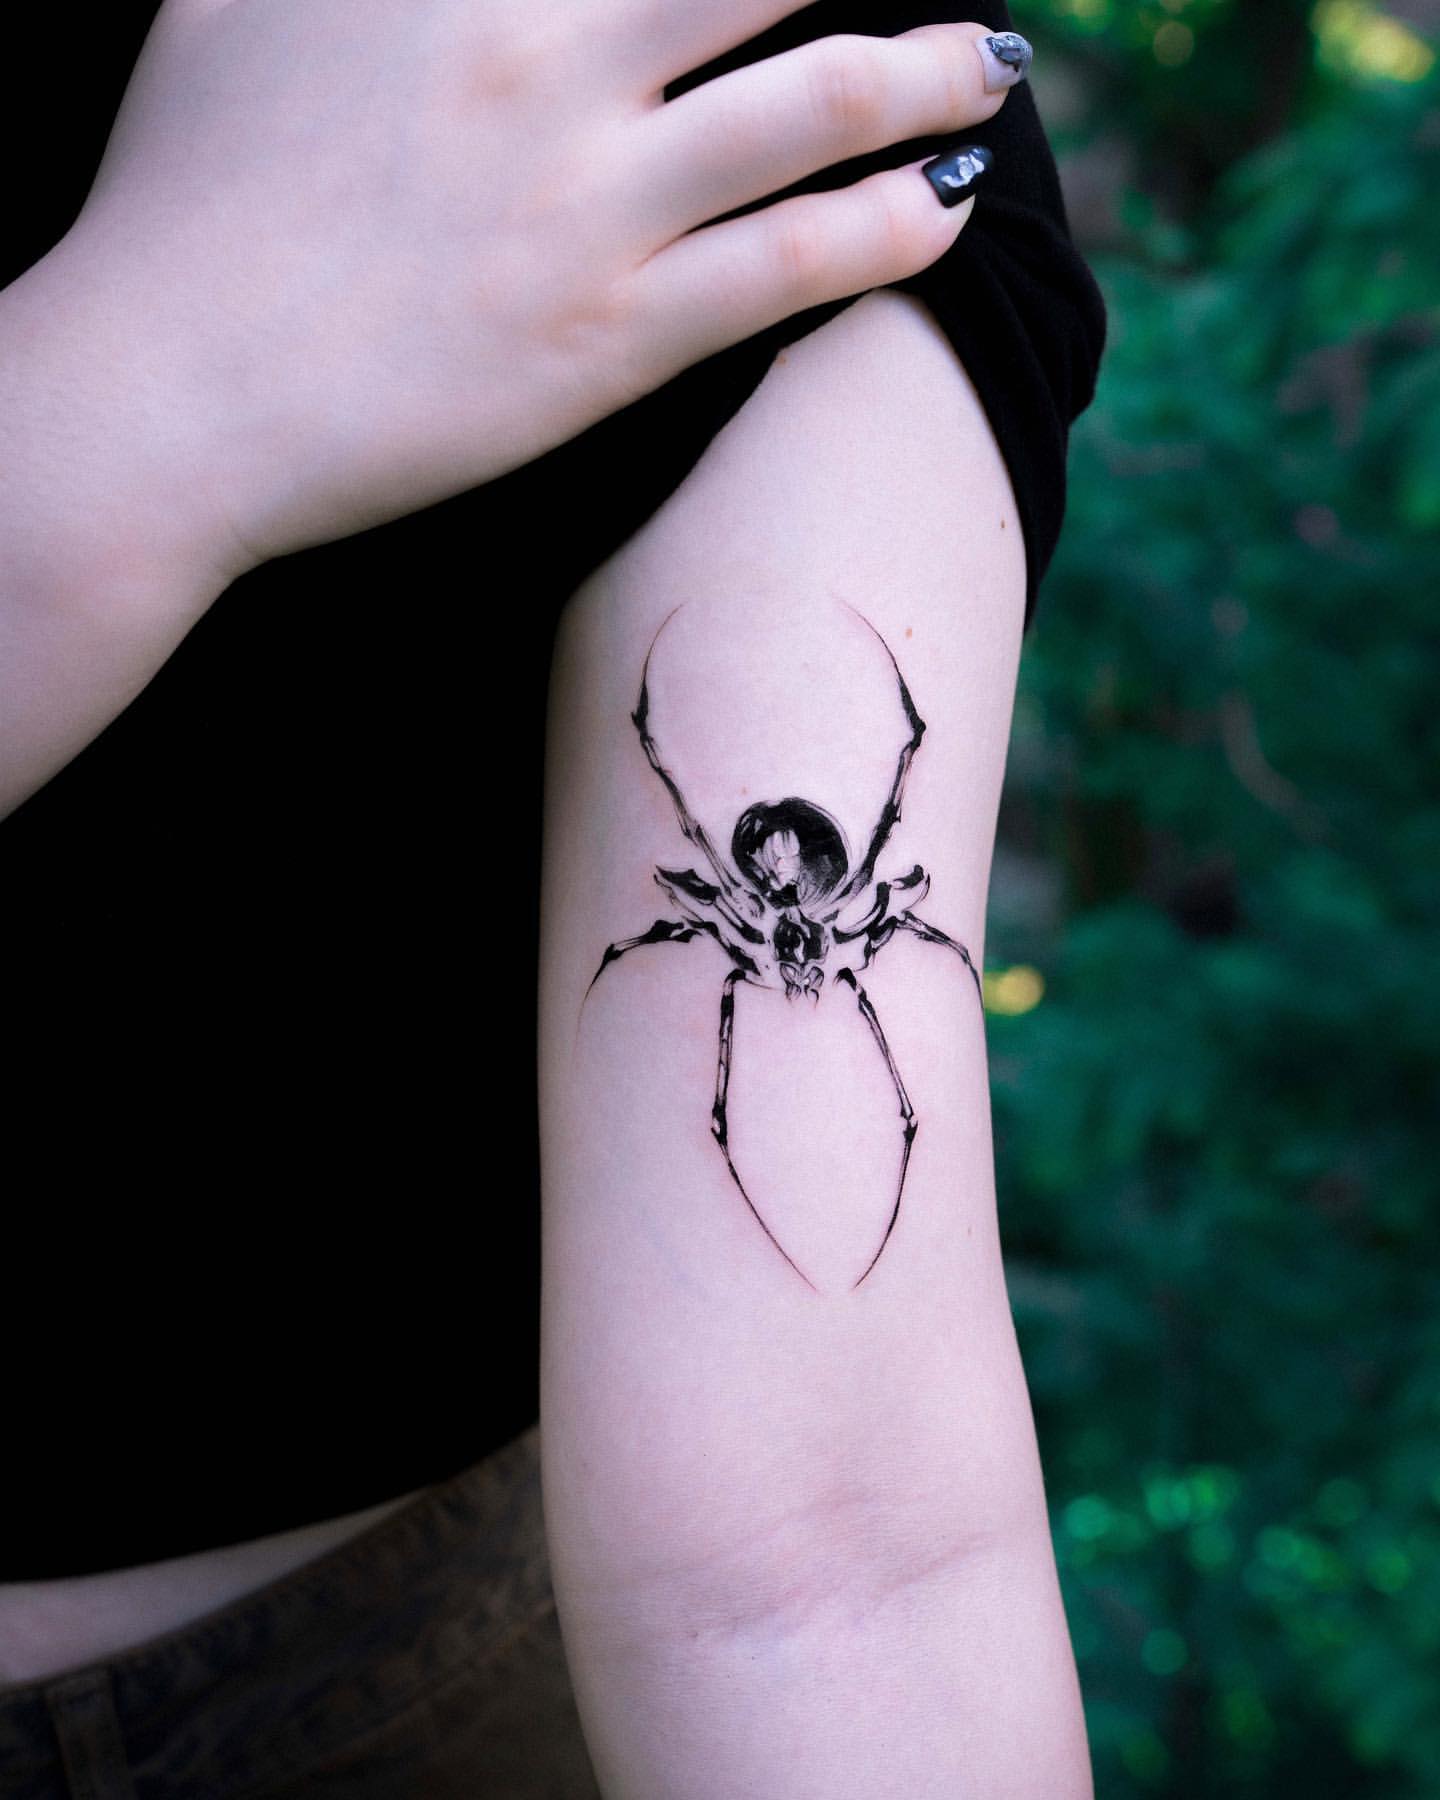 33 Meaningful Mental Health Tattoos to Give You Strength & Courage